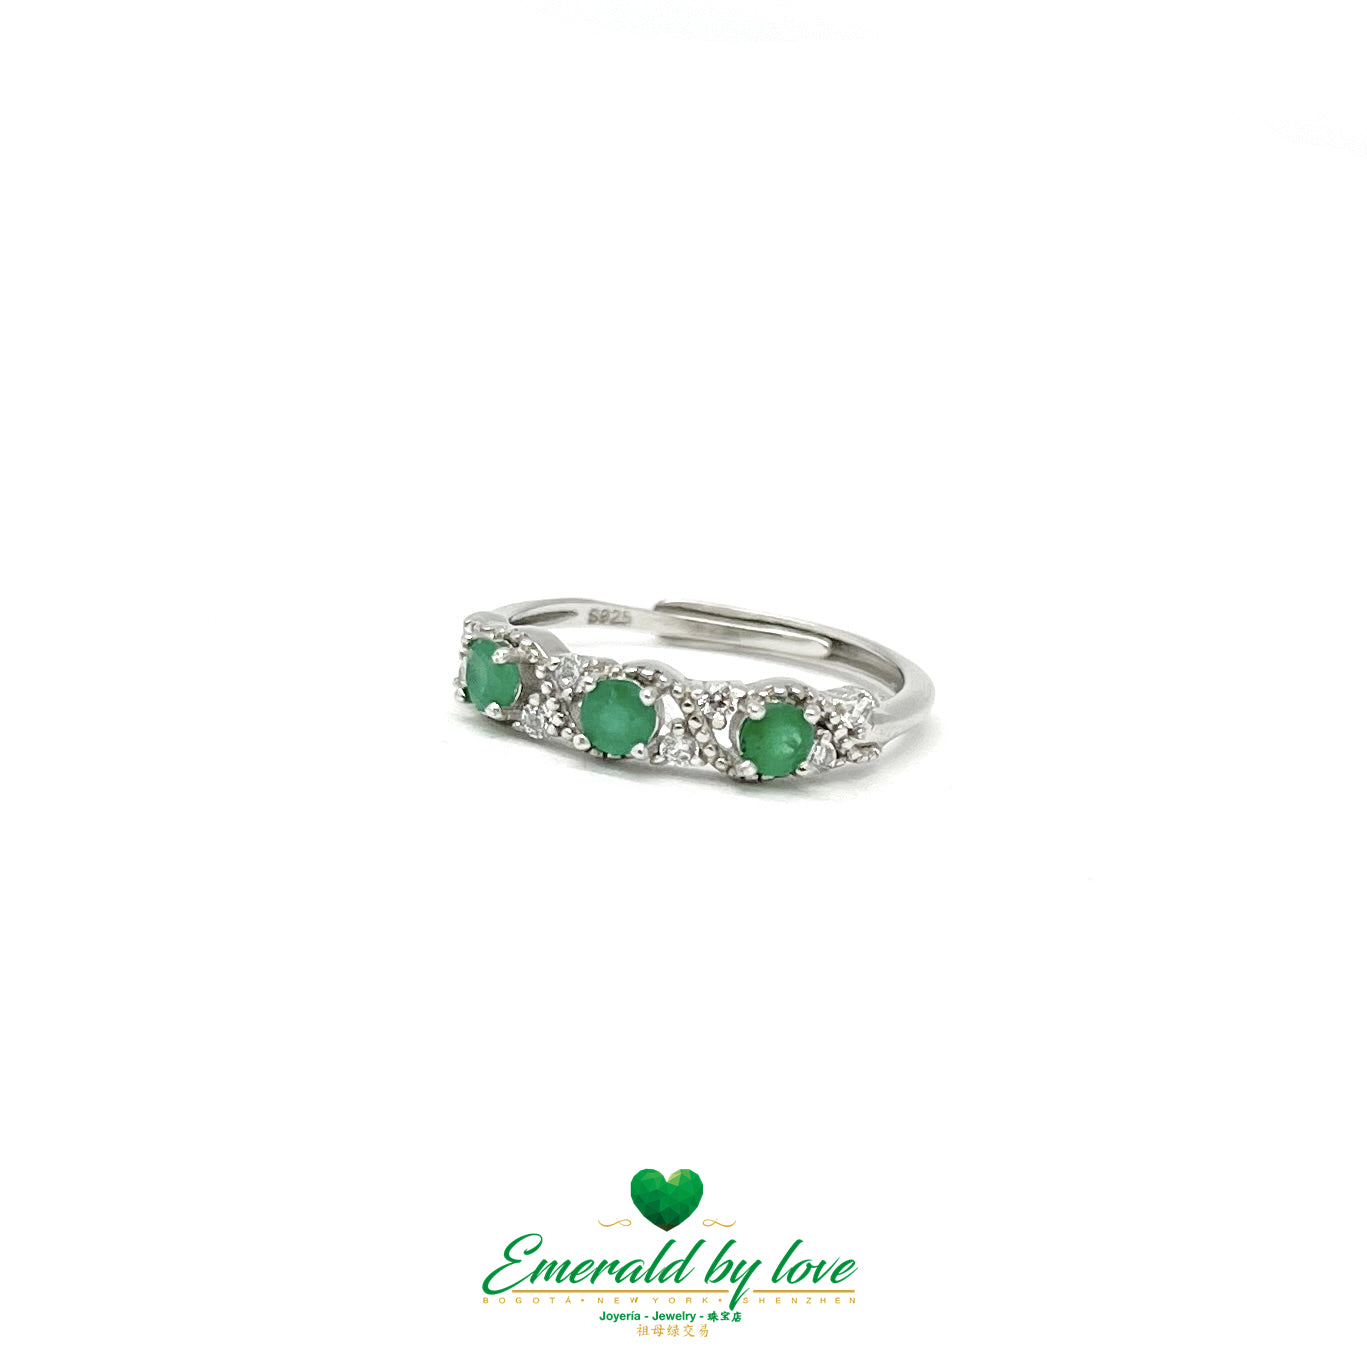 Curved Silver Band Ring with Interspersed Emeralds and Zirconia Accents